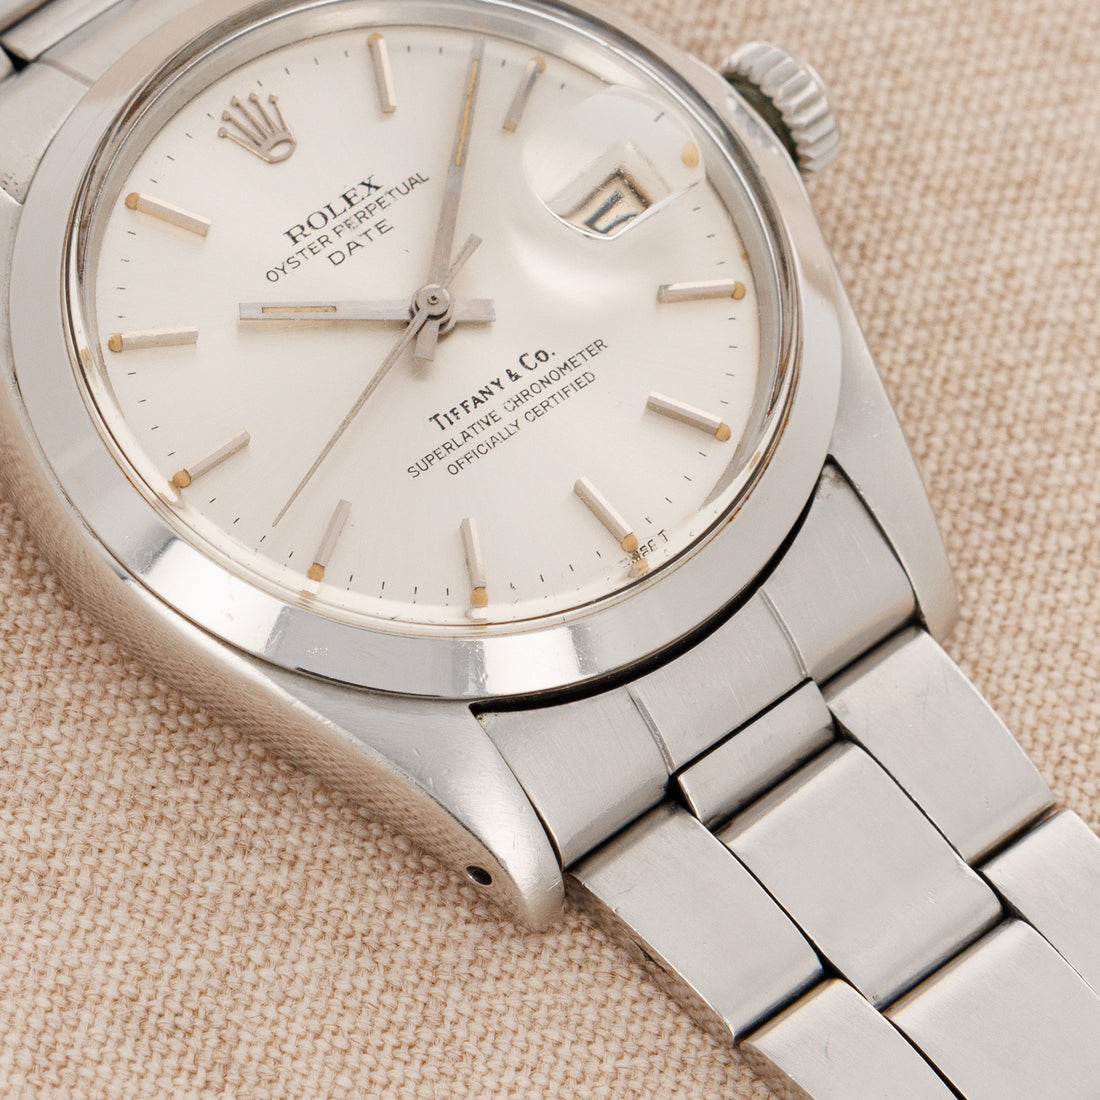 Rolex Steel Date Ref. 1500 with Tiffany & Co. Signature